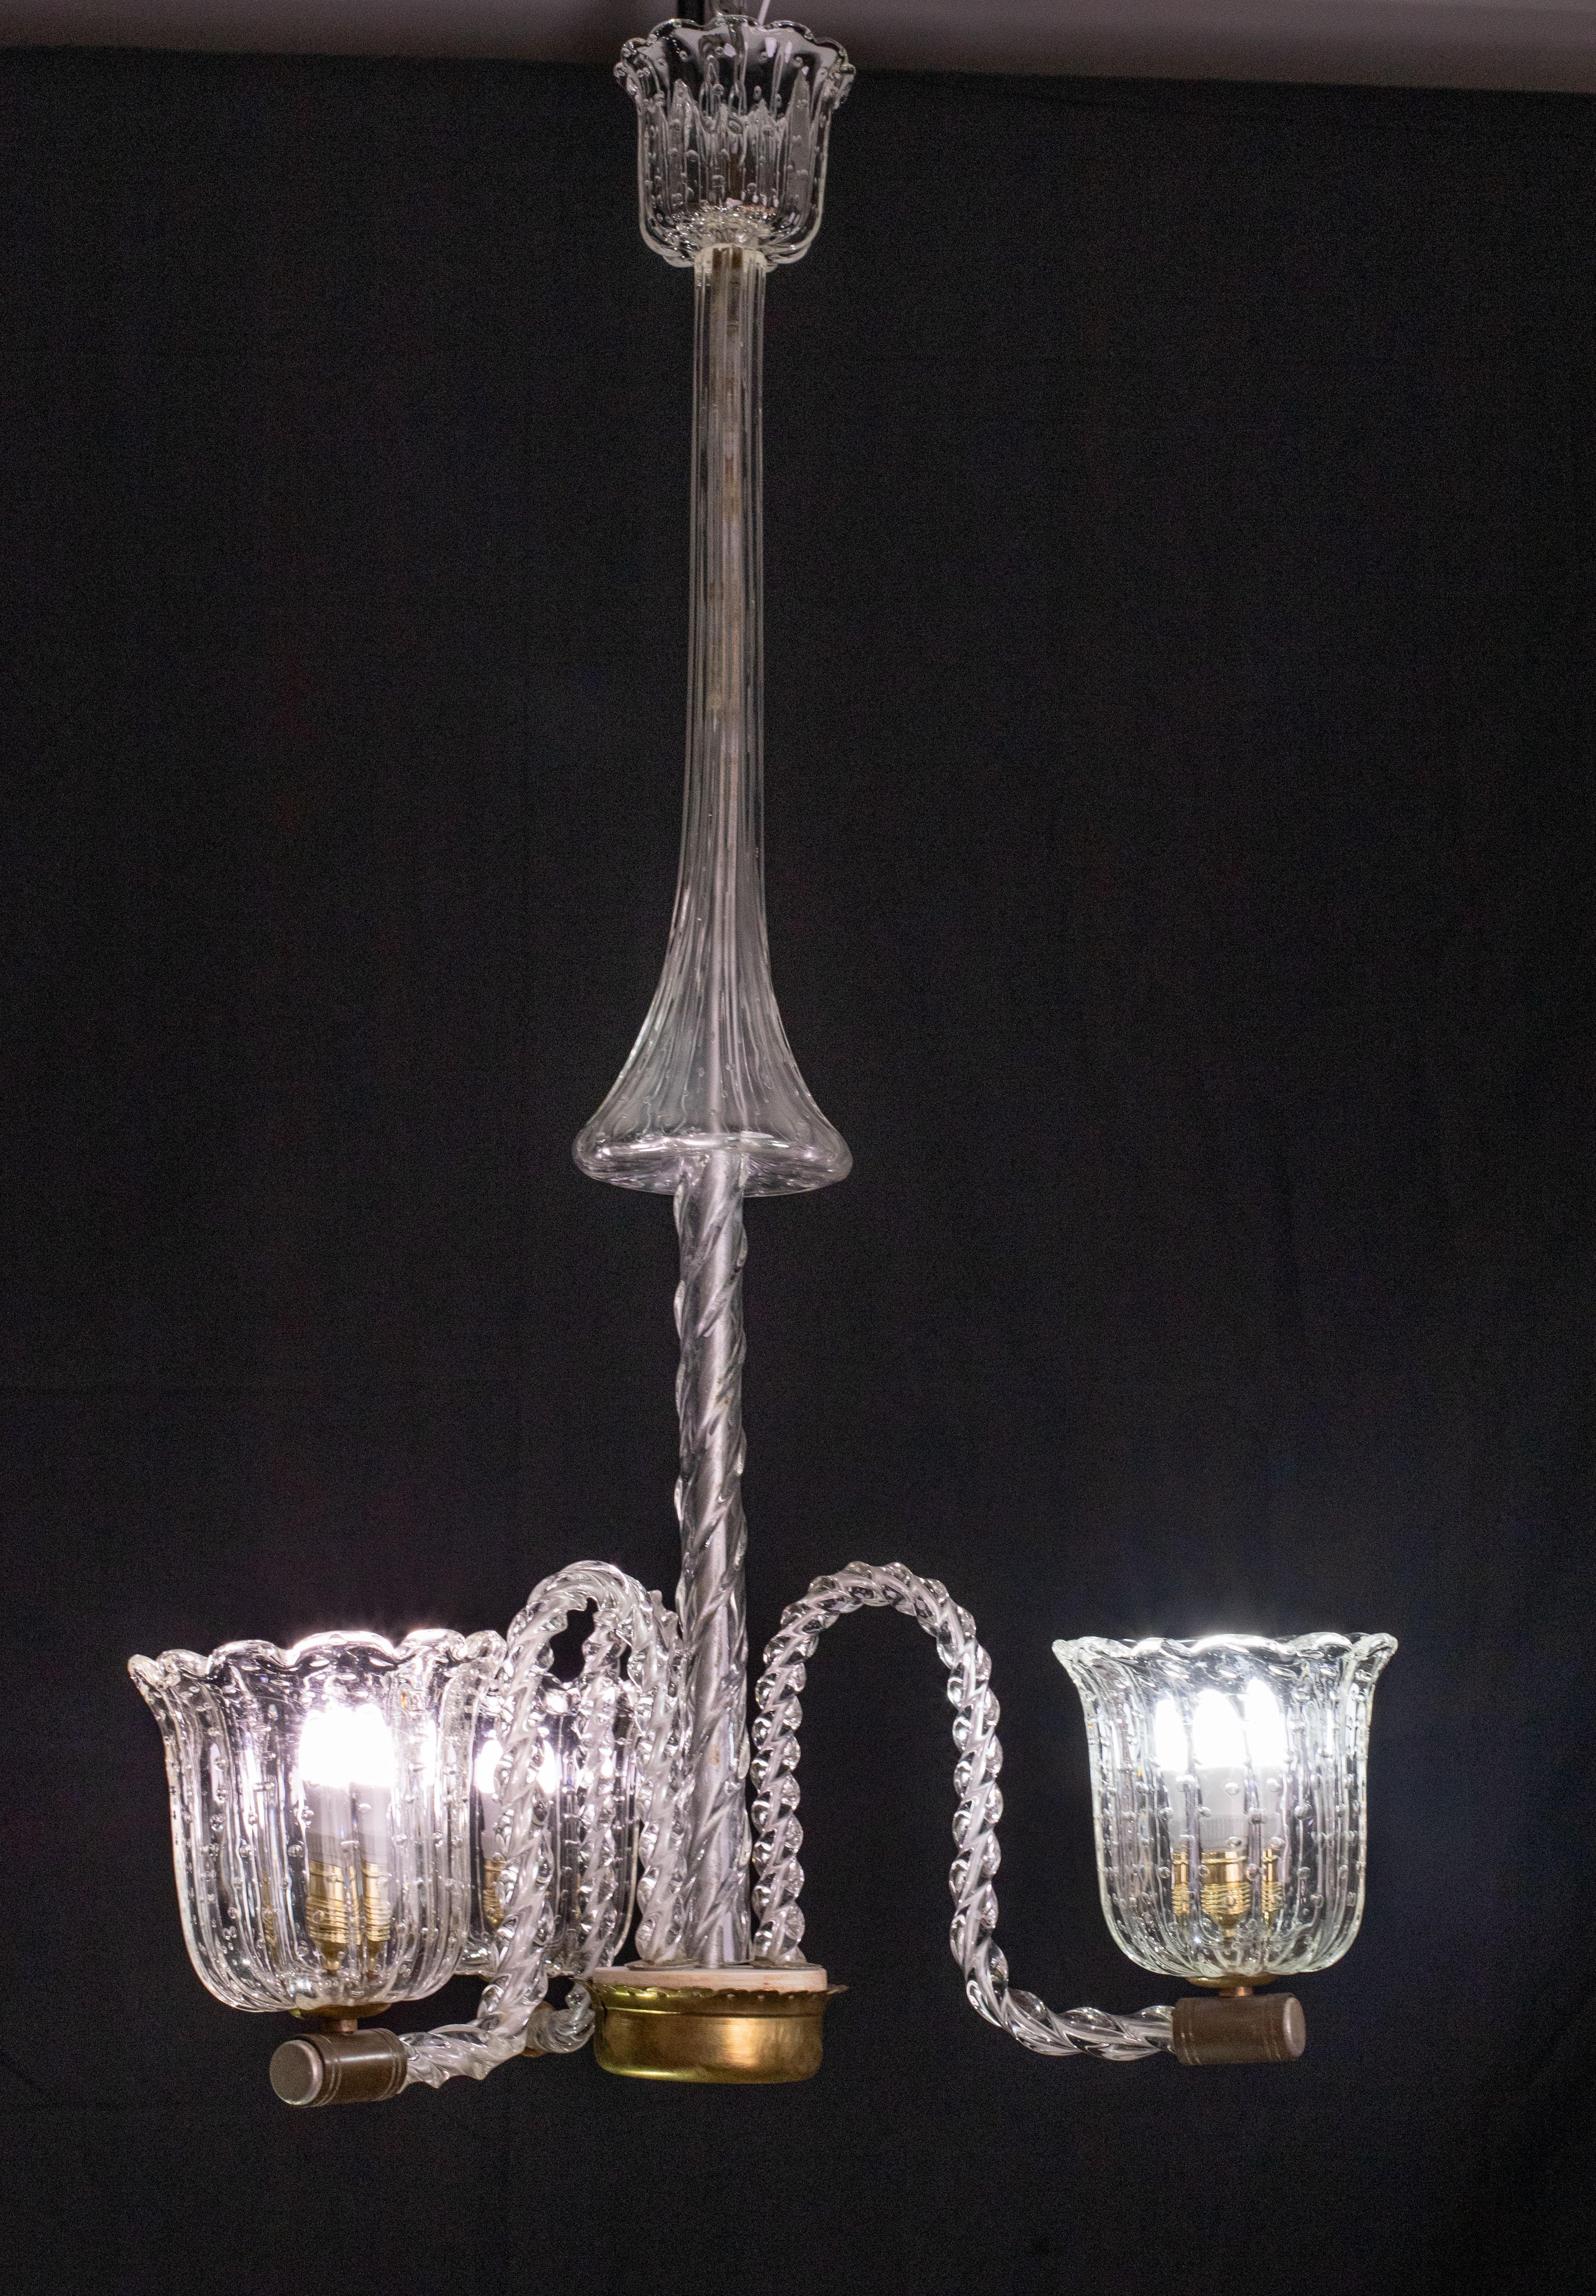 Elegant chandelier attributed to Ercole Barovier.

1940s period.

A stupendous work in glass, the 3 cups and the rosette with a 